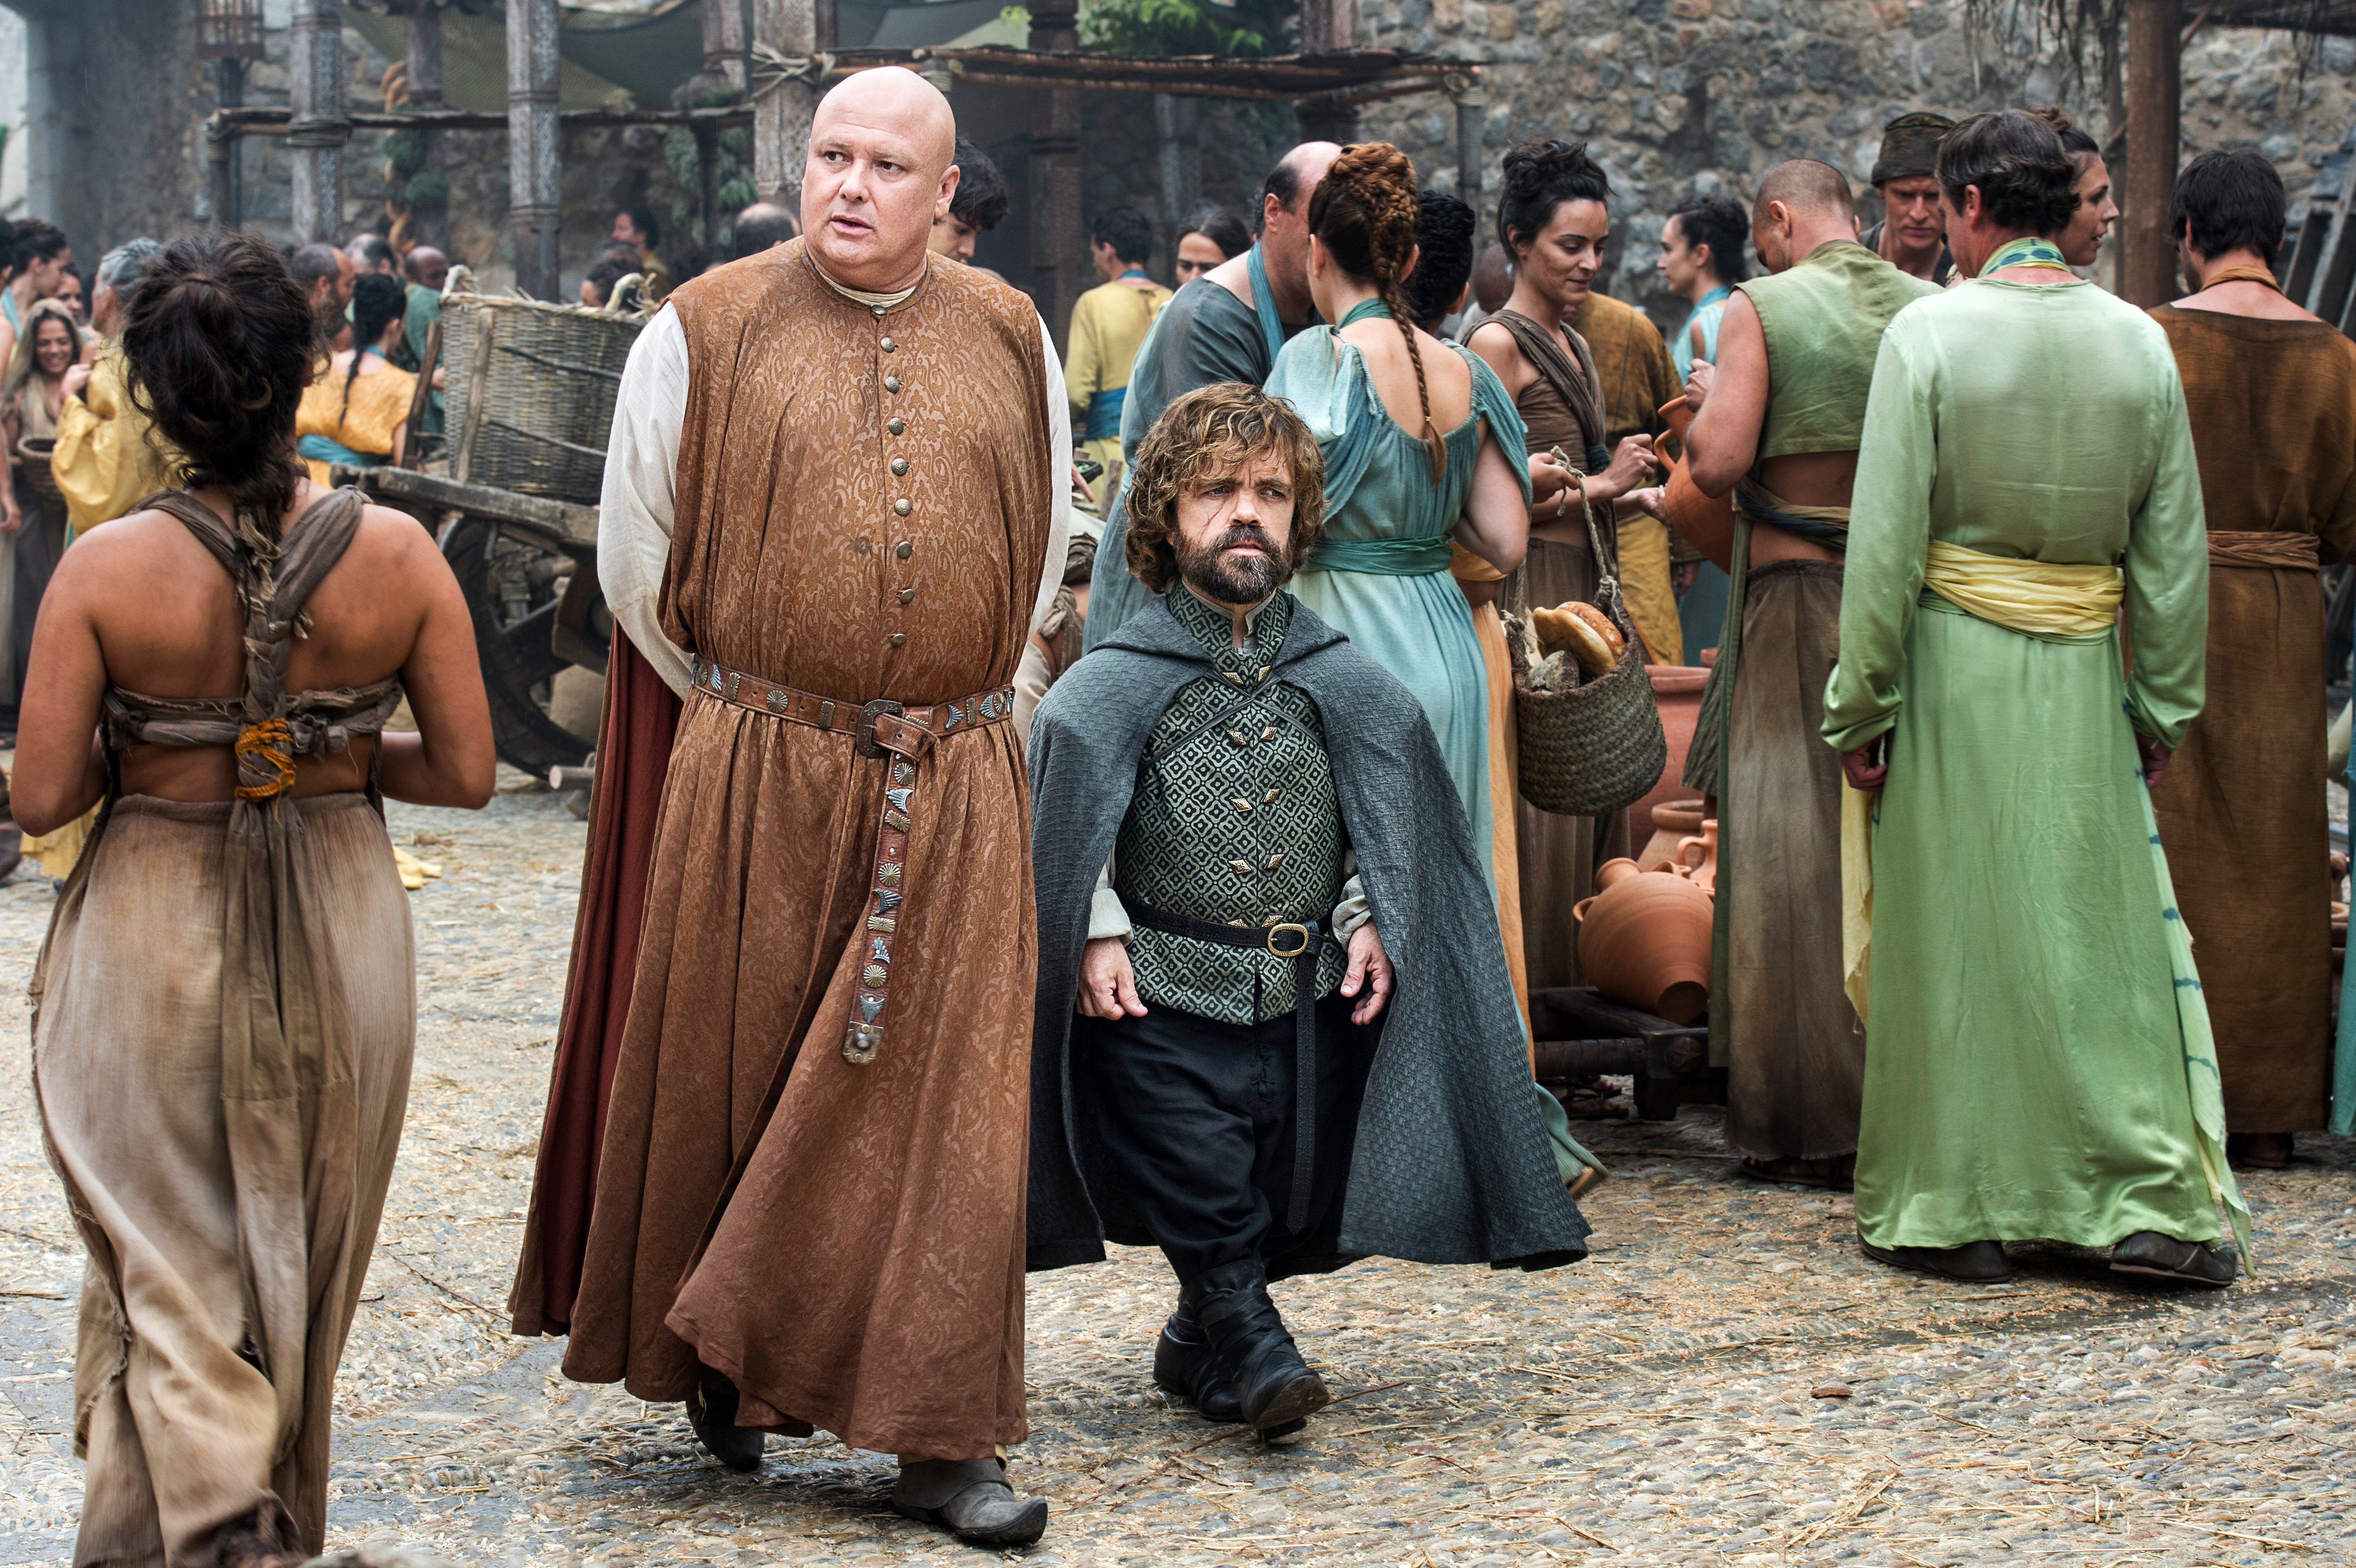 Conleth Hill Game Of Thrones Lord Varys Peter Dinklage Tyrion Lannister 4928x3280